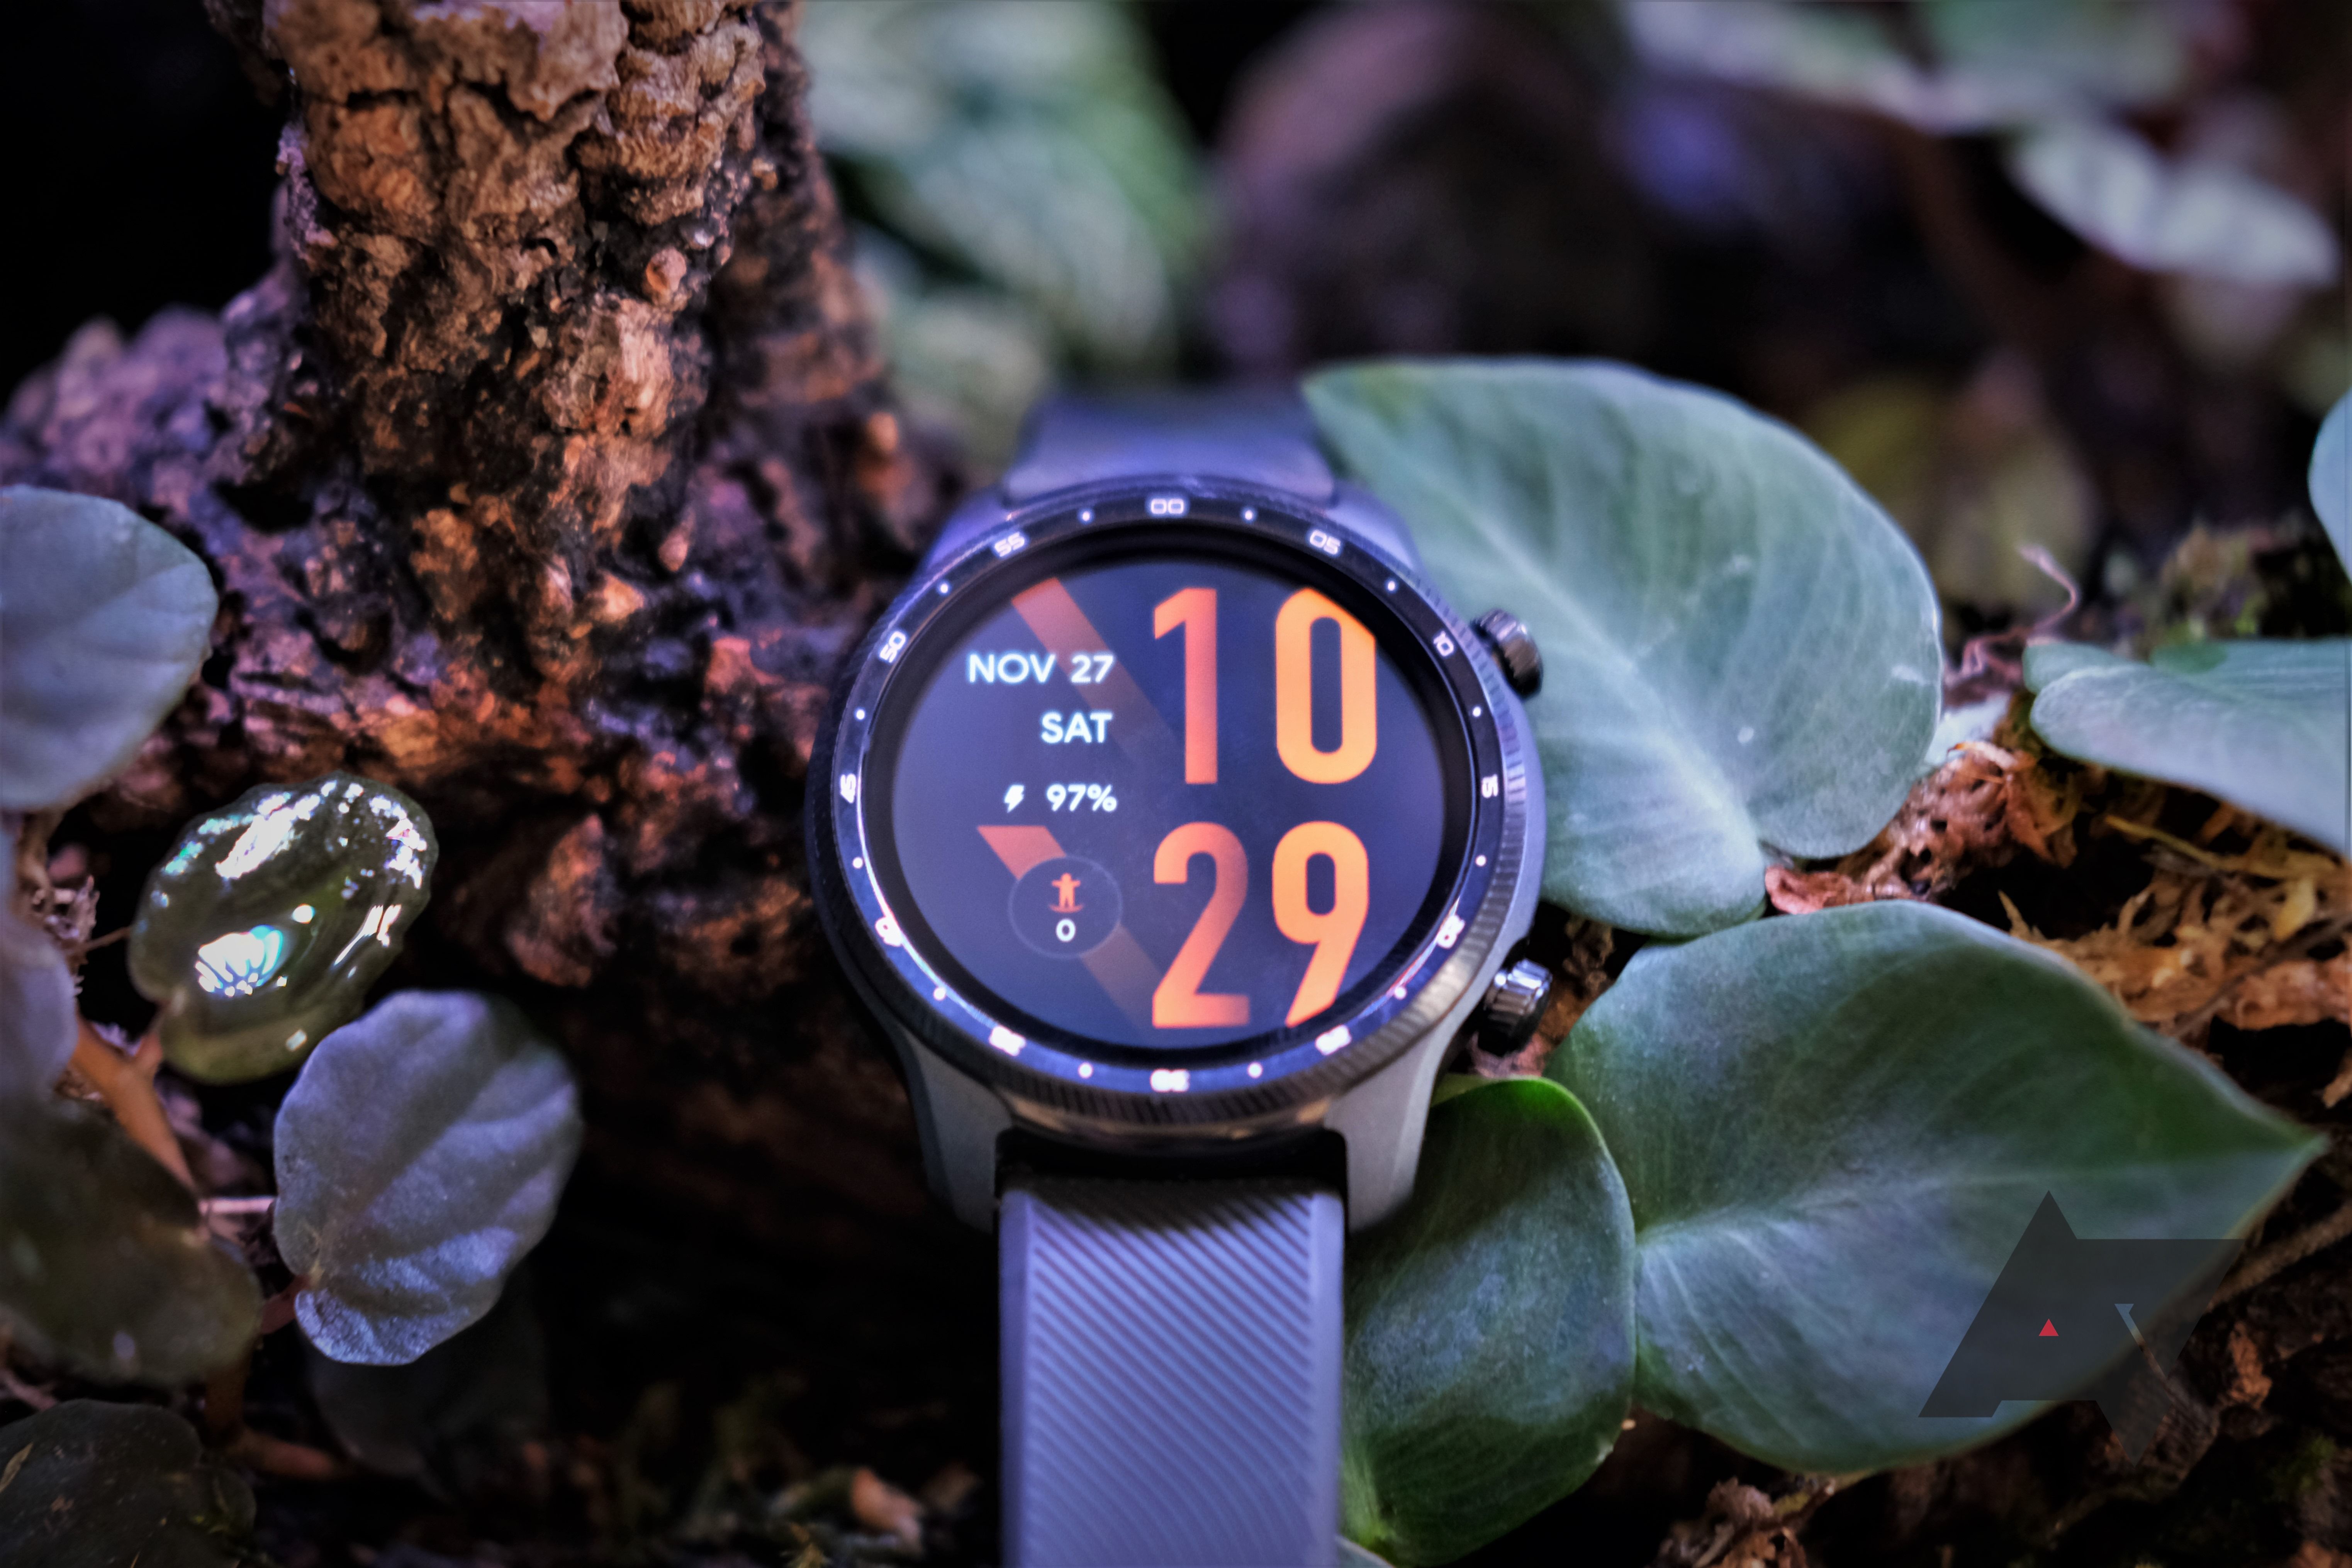 Mobvoi TicWatch Pro 3 vs Mobvoi TicWatch Pro 3 Ultra GPS: What is the  difference?